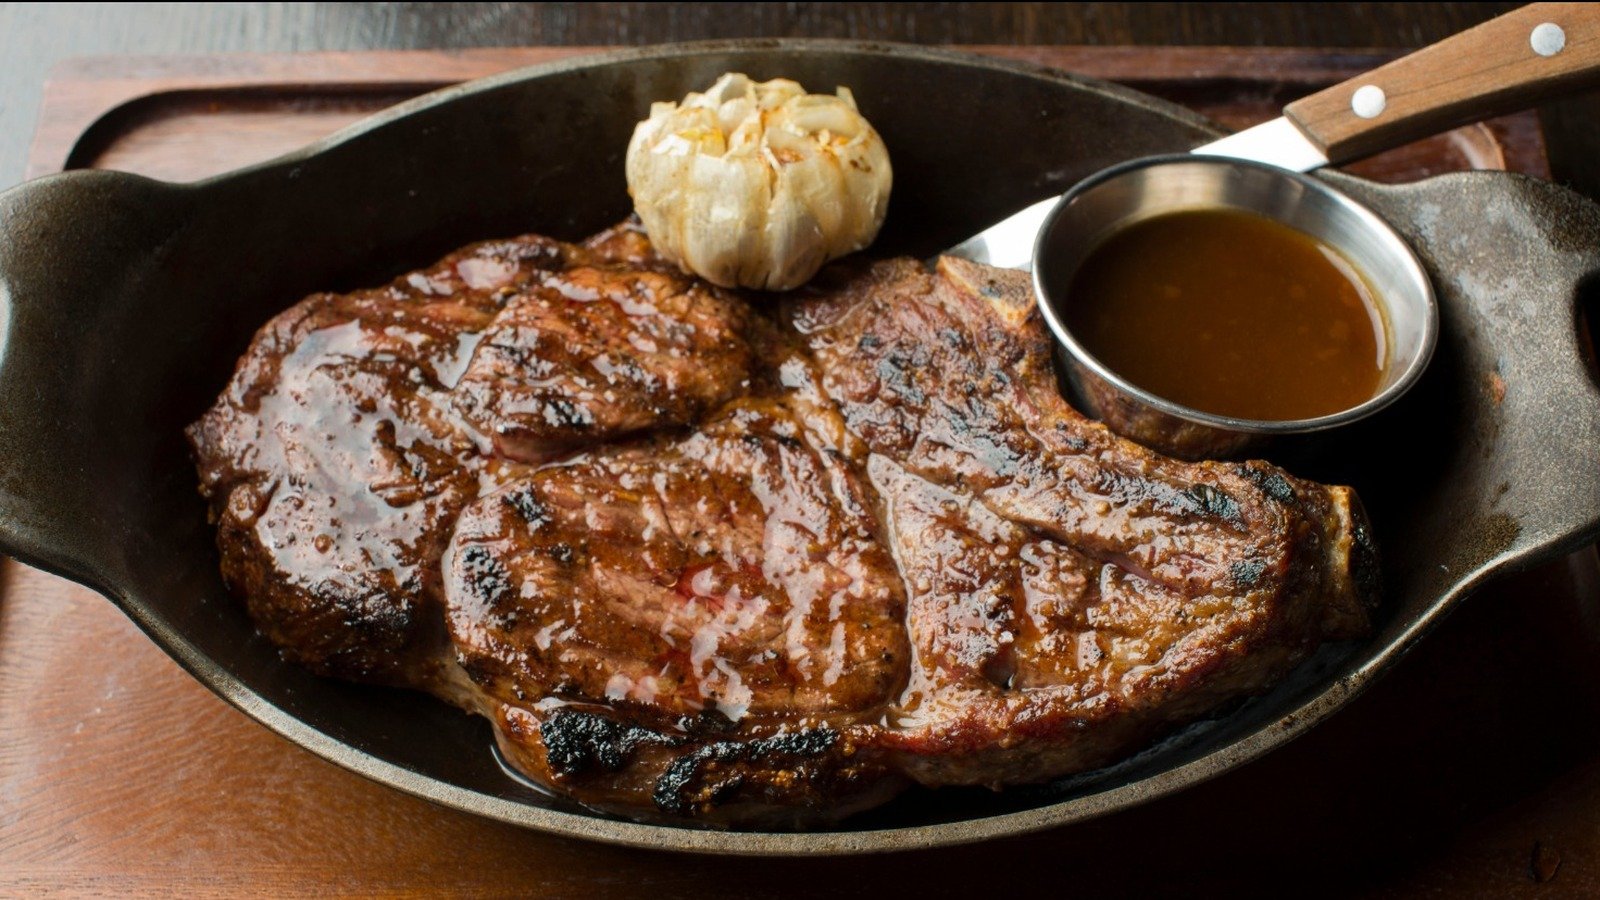 10 Things You Might Want To Steer Clear Of At A Steakhouse